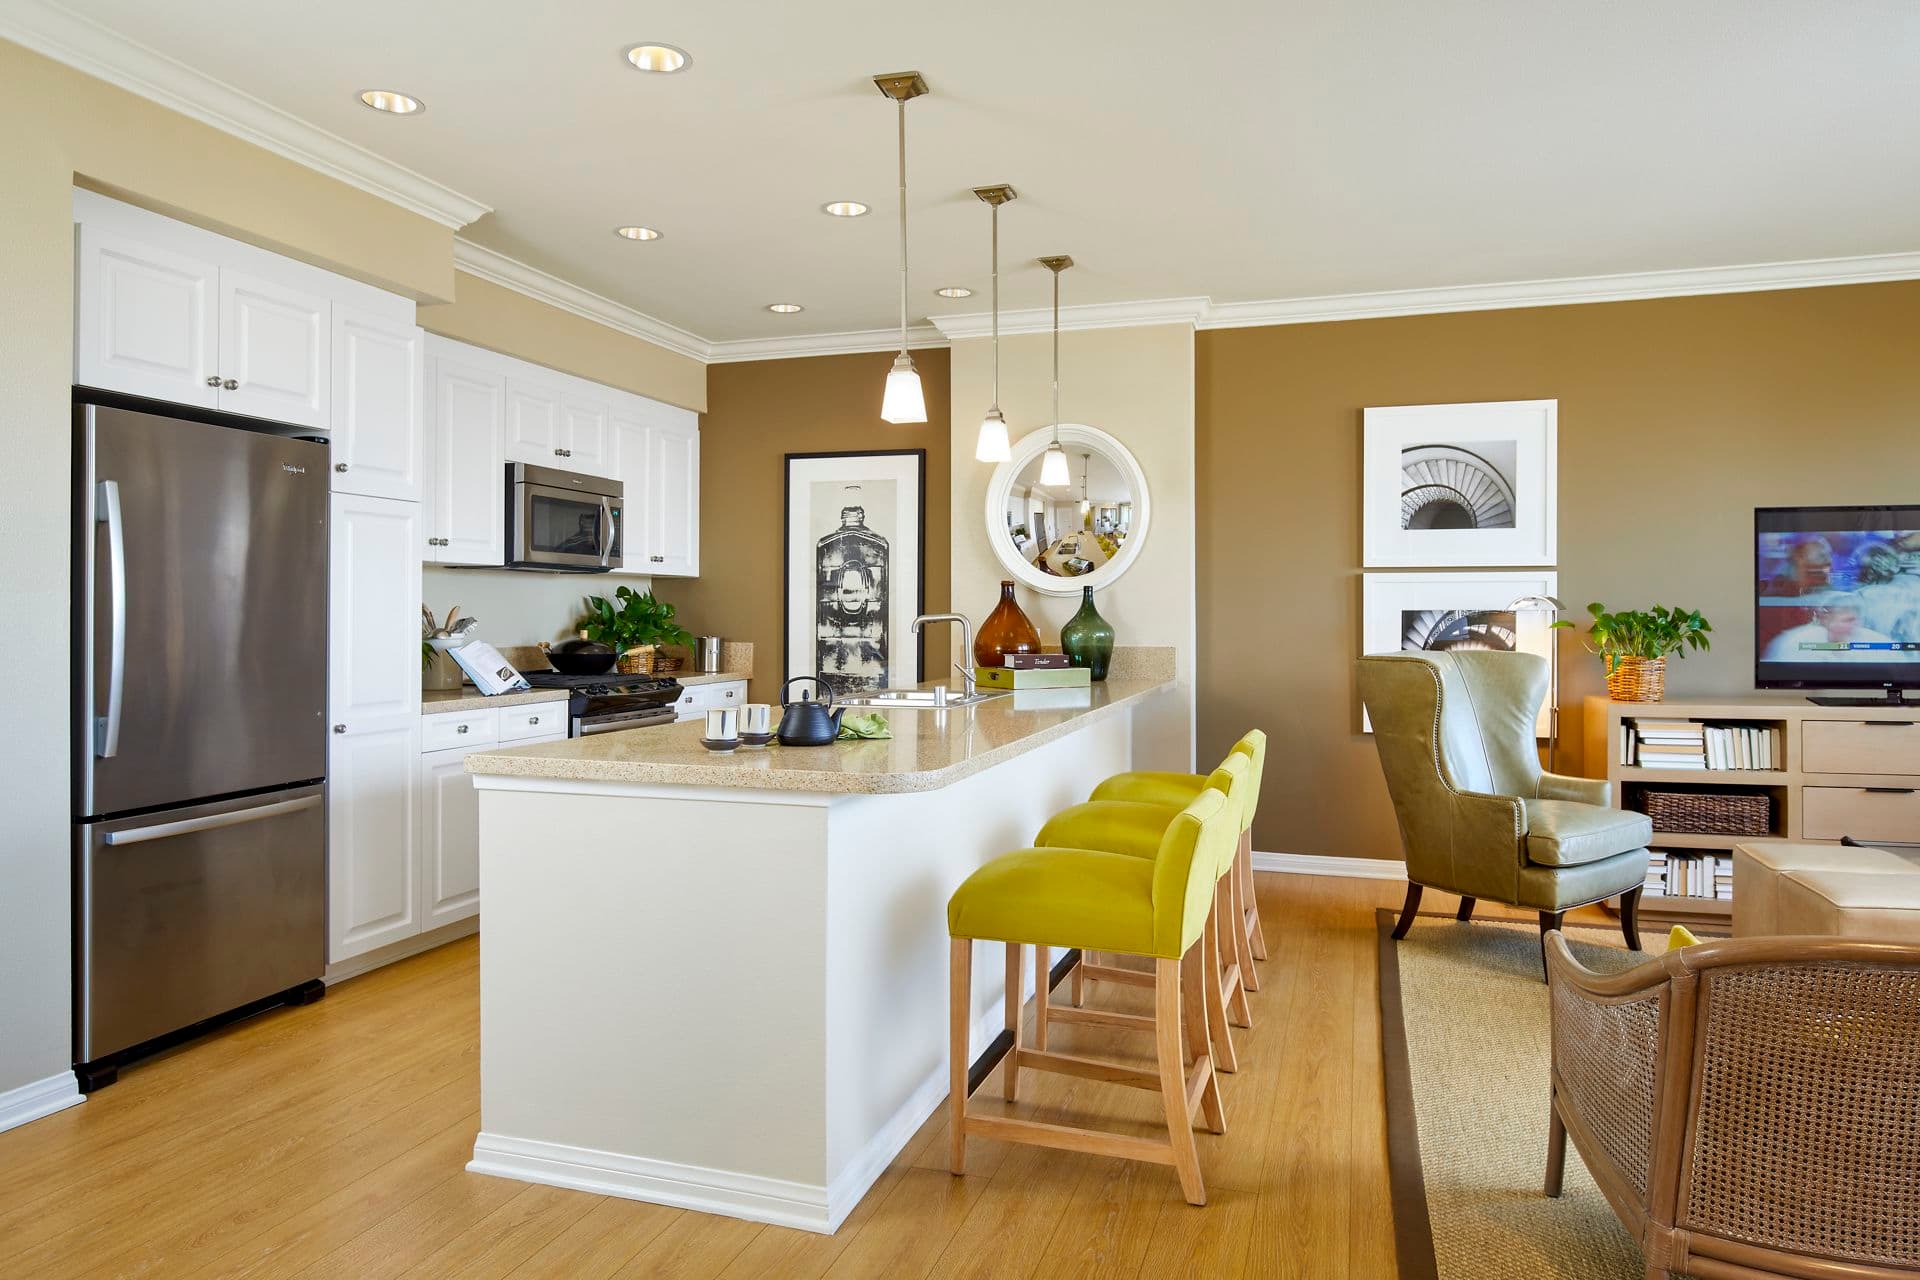 Interior view of Kitchen at Crescent Village Apartment Homes in San Jose, CA.